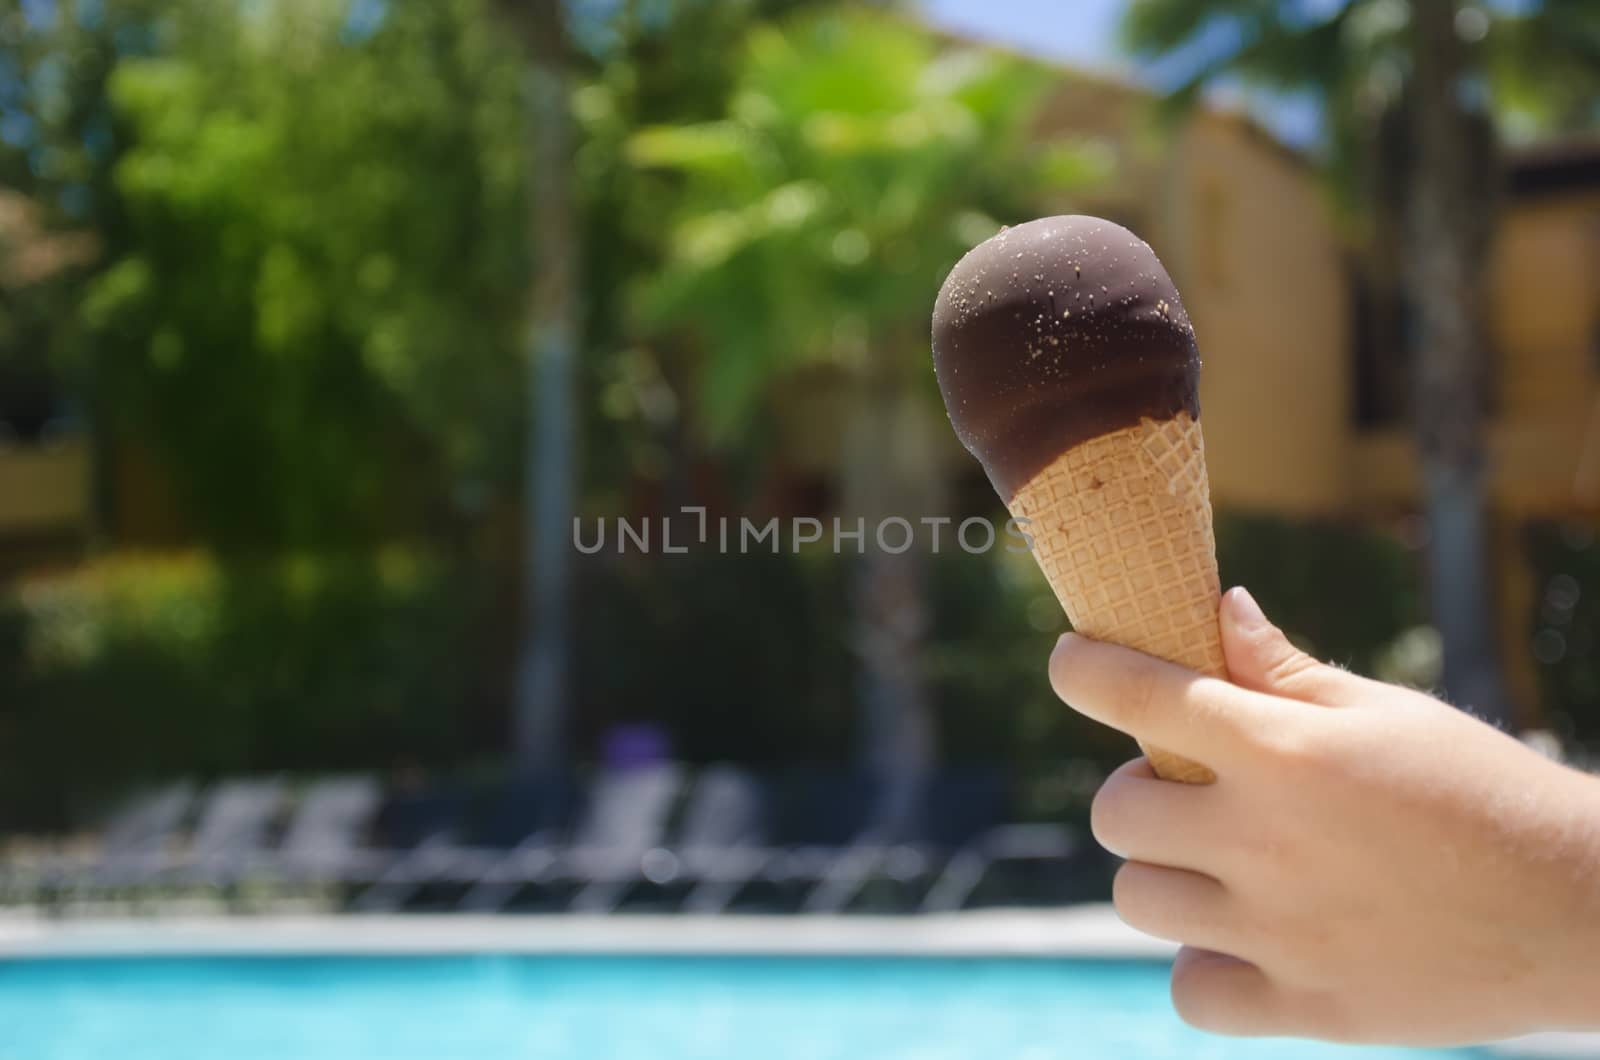 Ice cream in a child's hand close-up on the background of the swimming pool